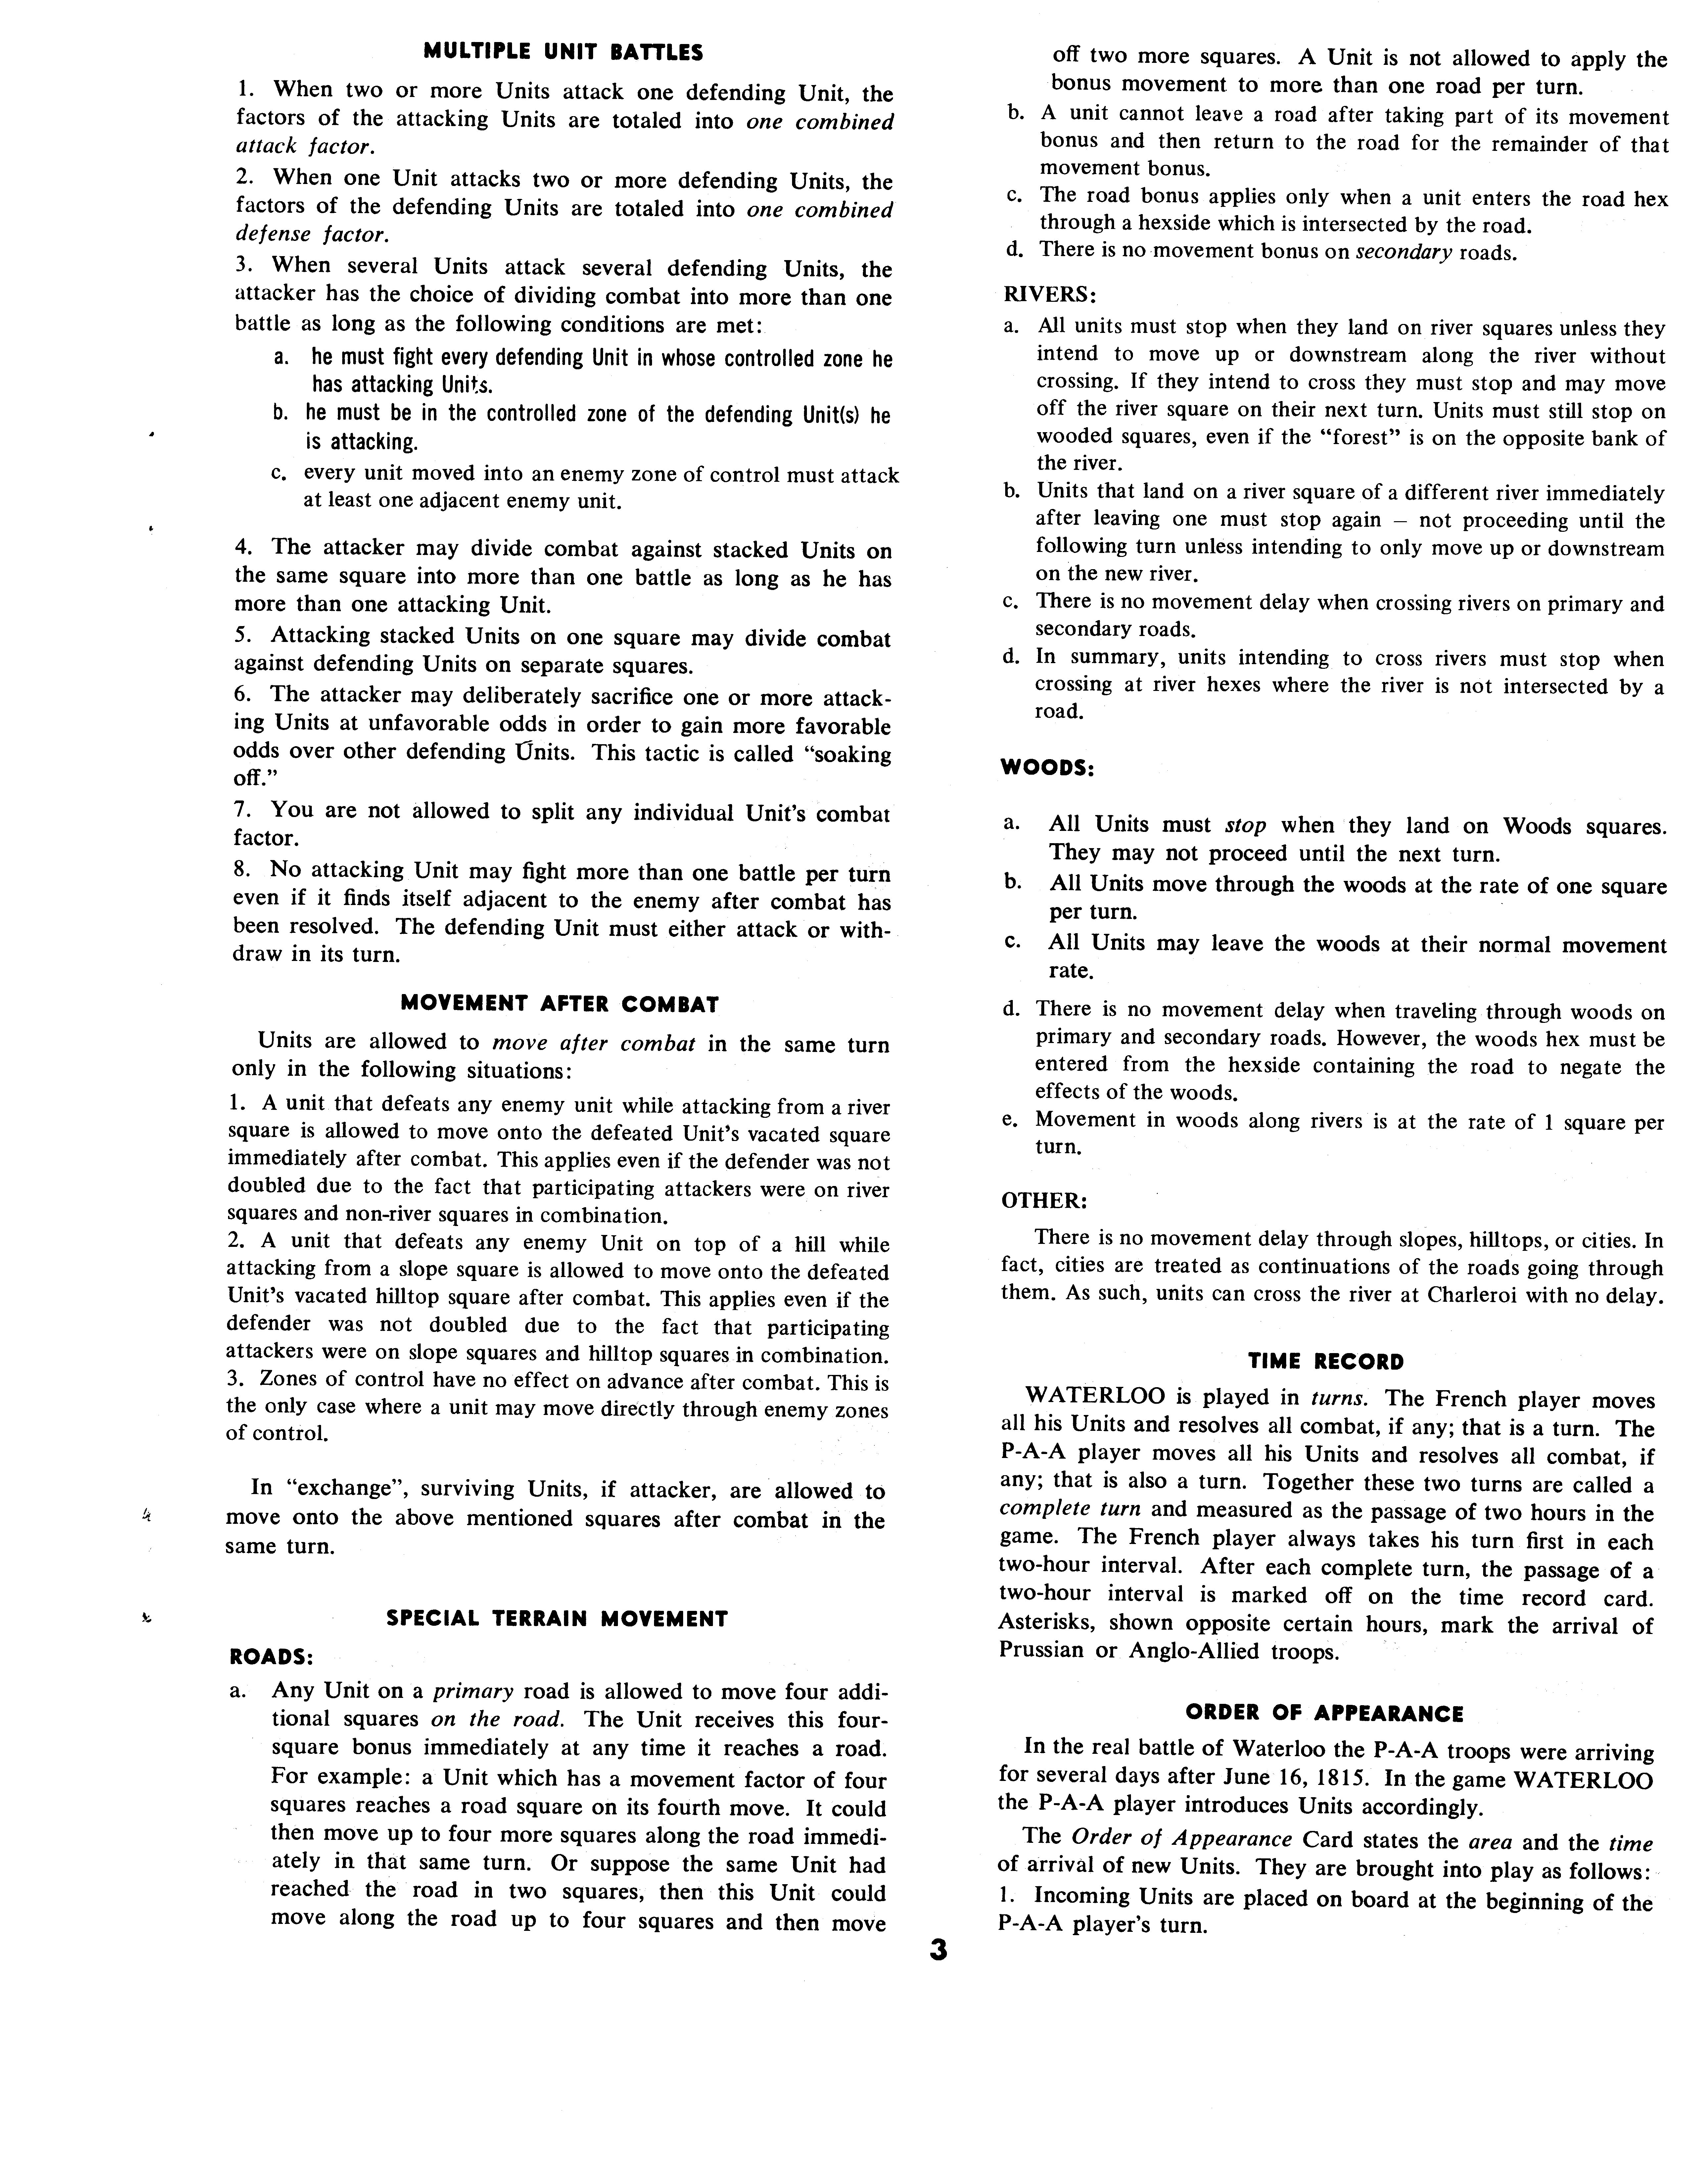 Waterloo Rules Page 3